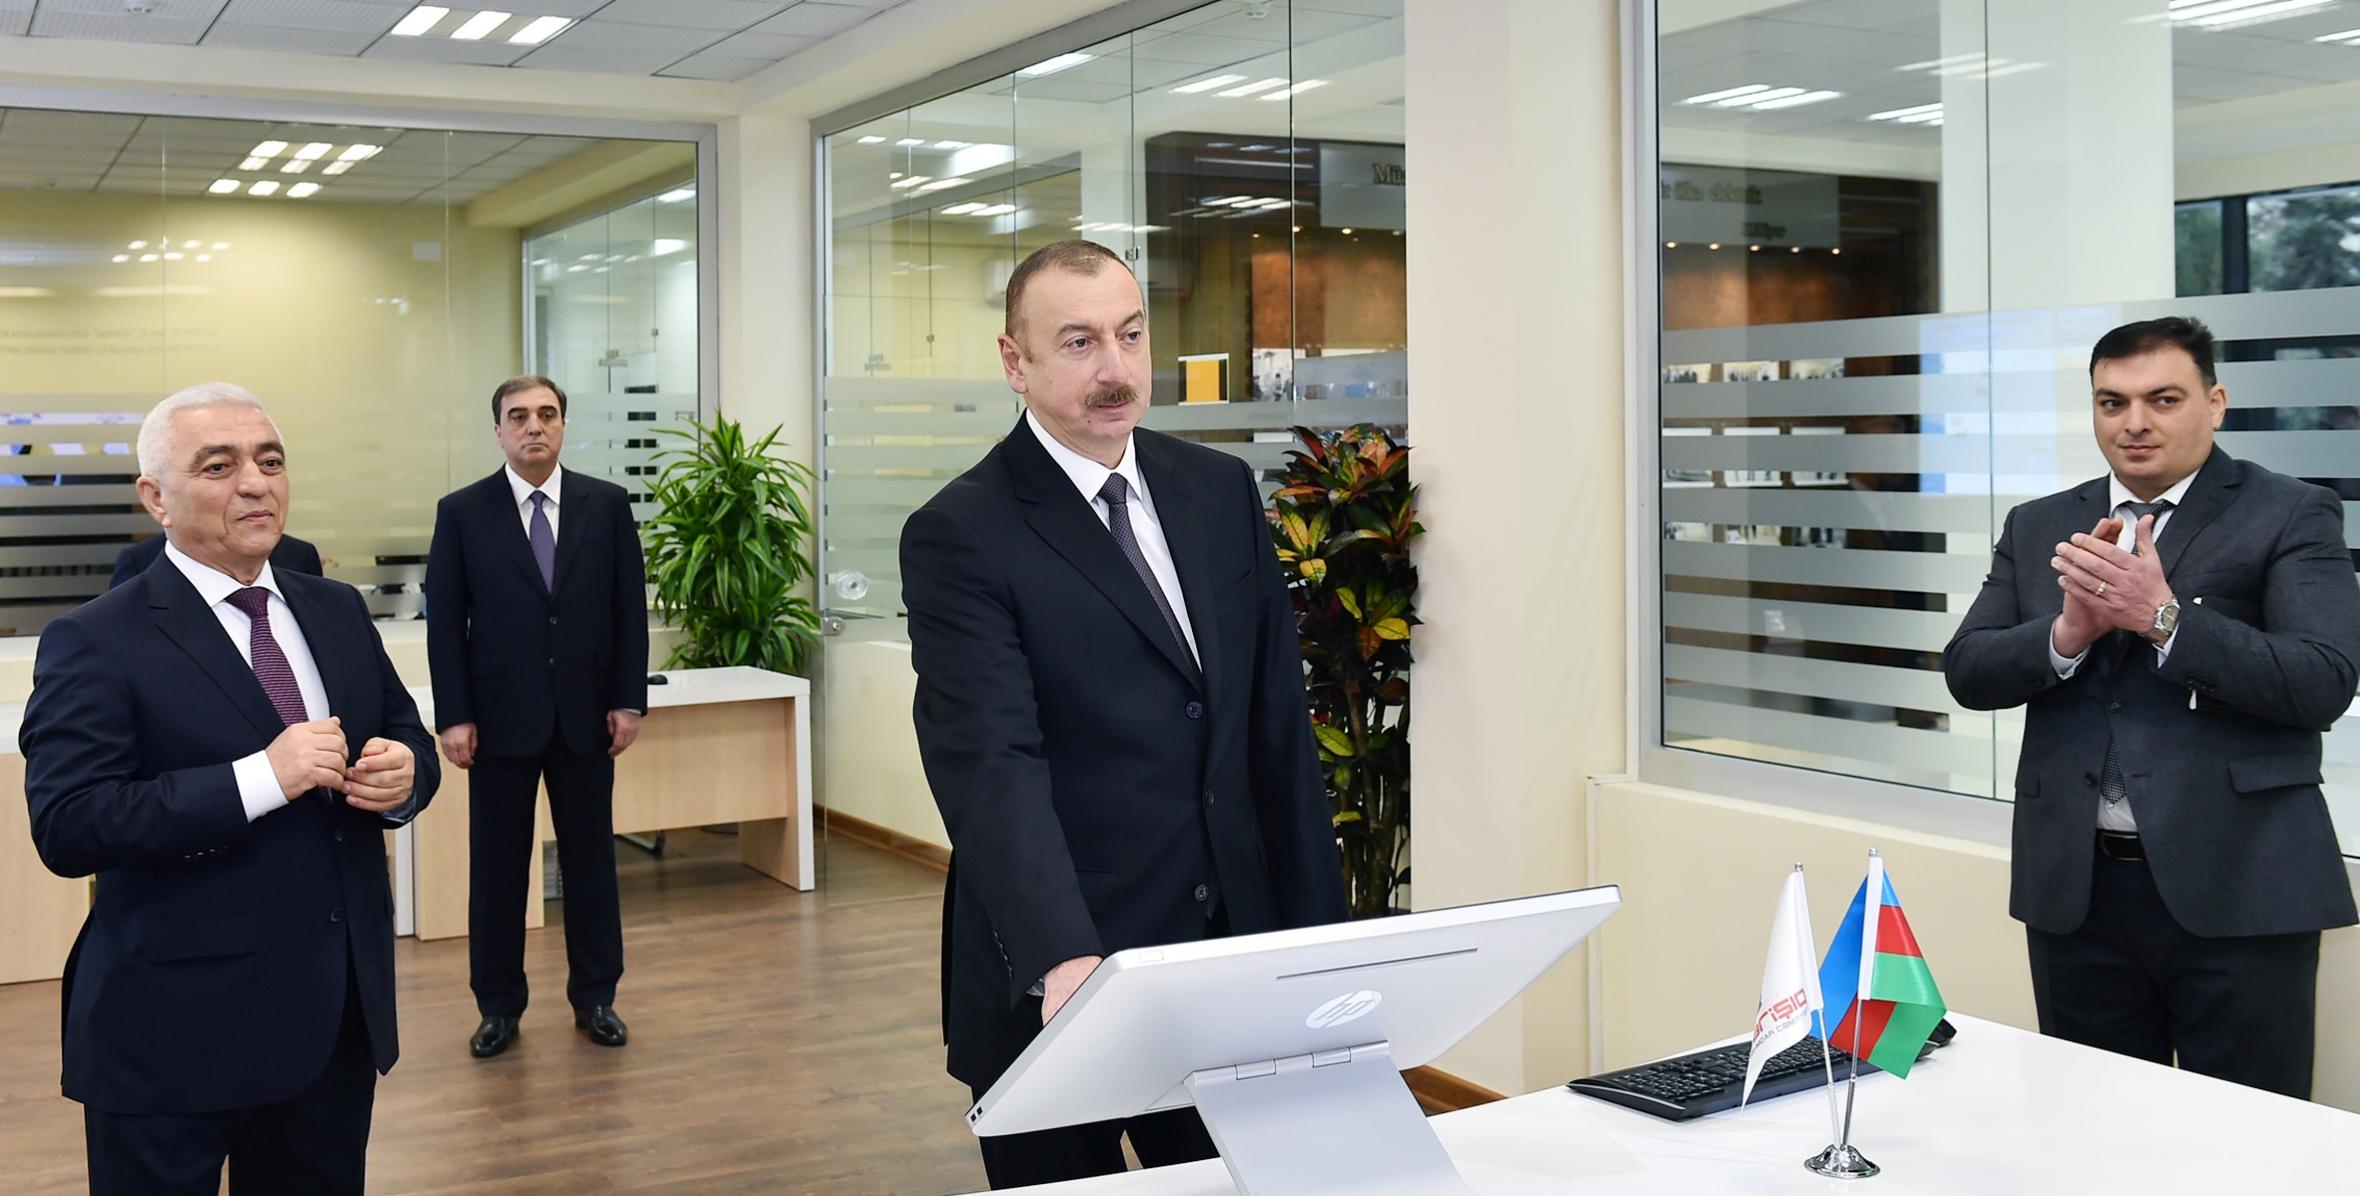 Ilham Aliyev inaugurated Automated Control and Monitoring Center of Mingachevir Electric Power Distribution Network